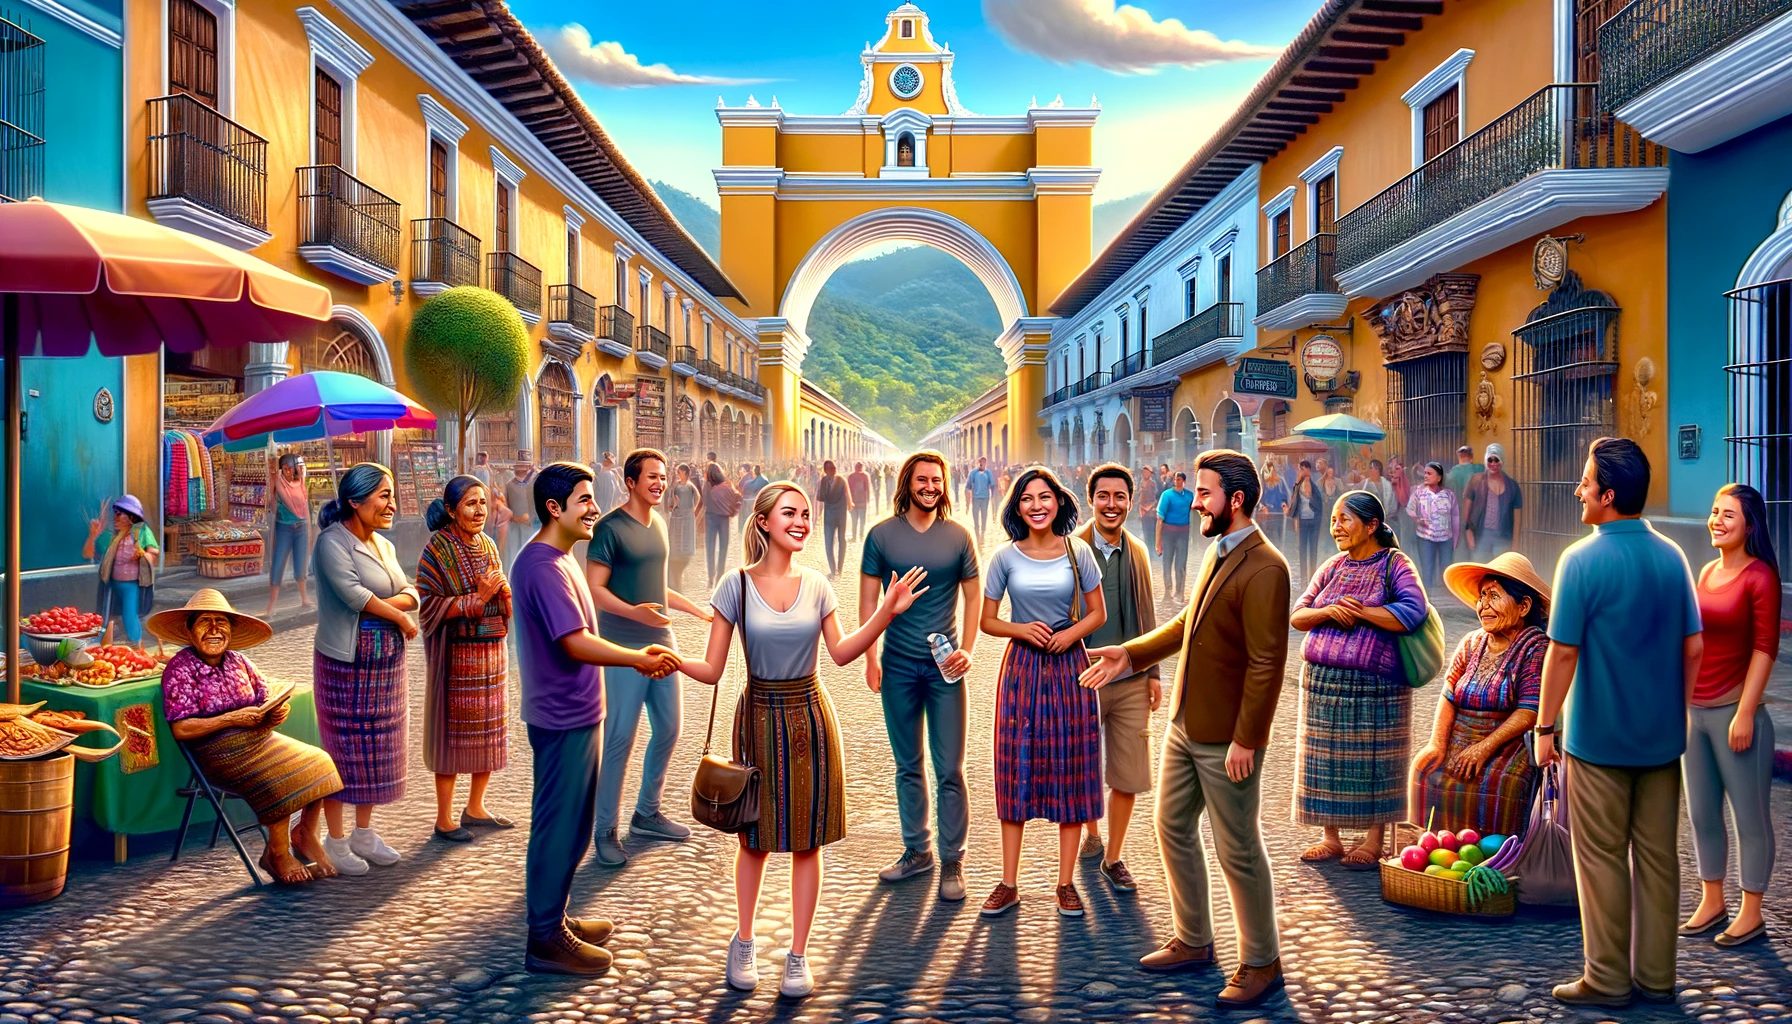 Colorful street scene with people, arch, and market.